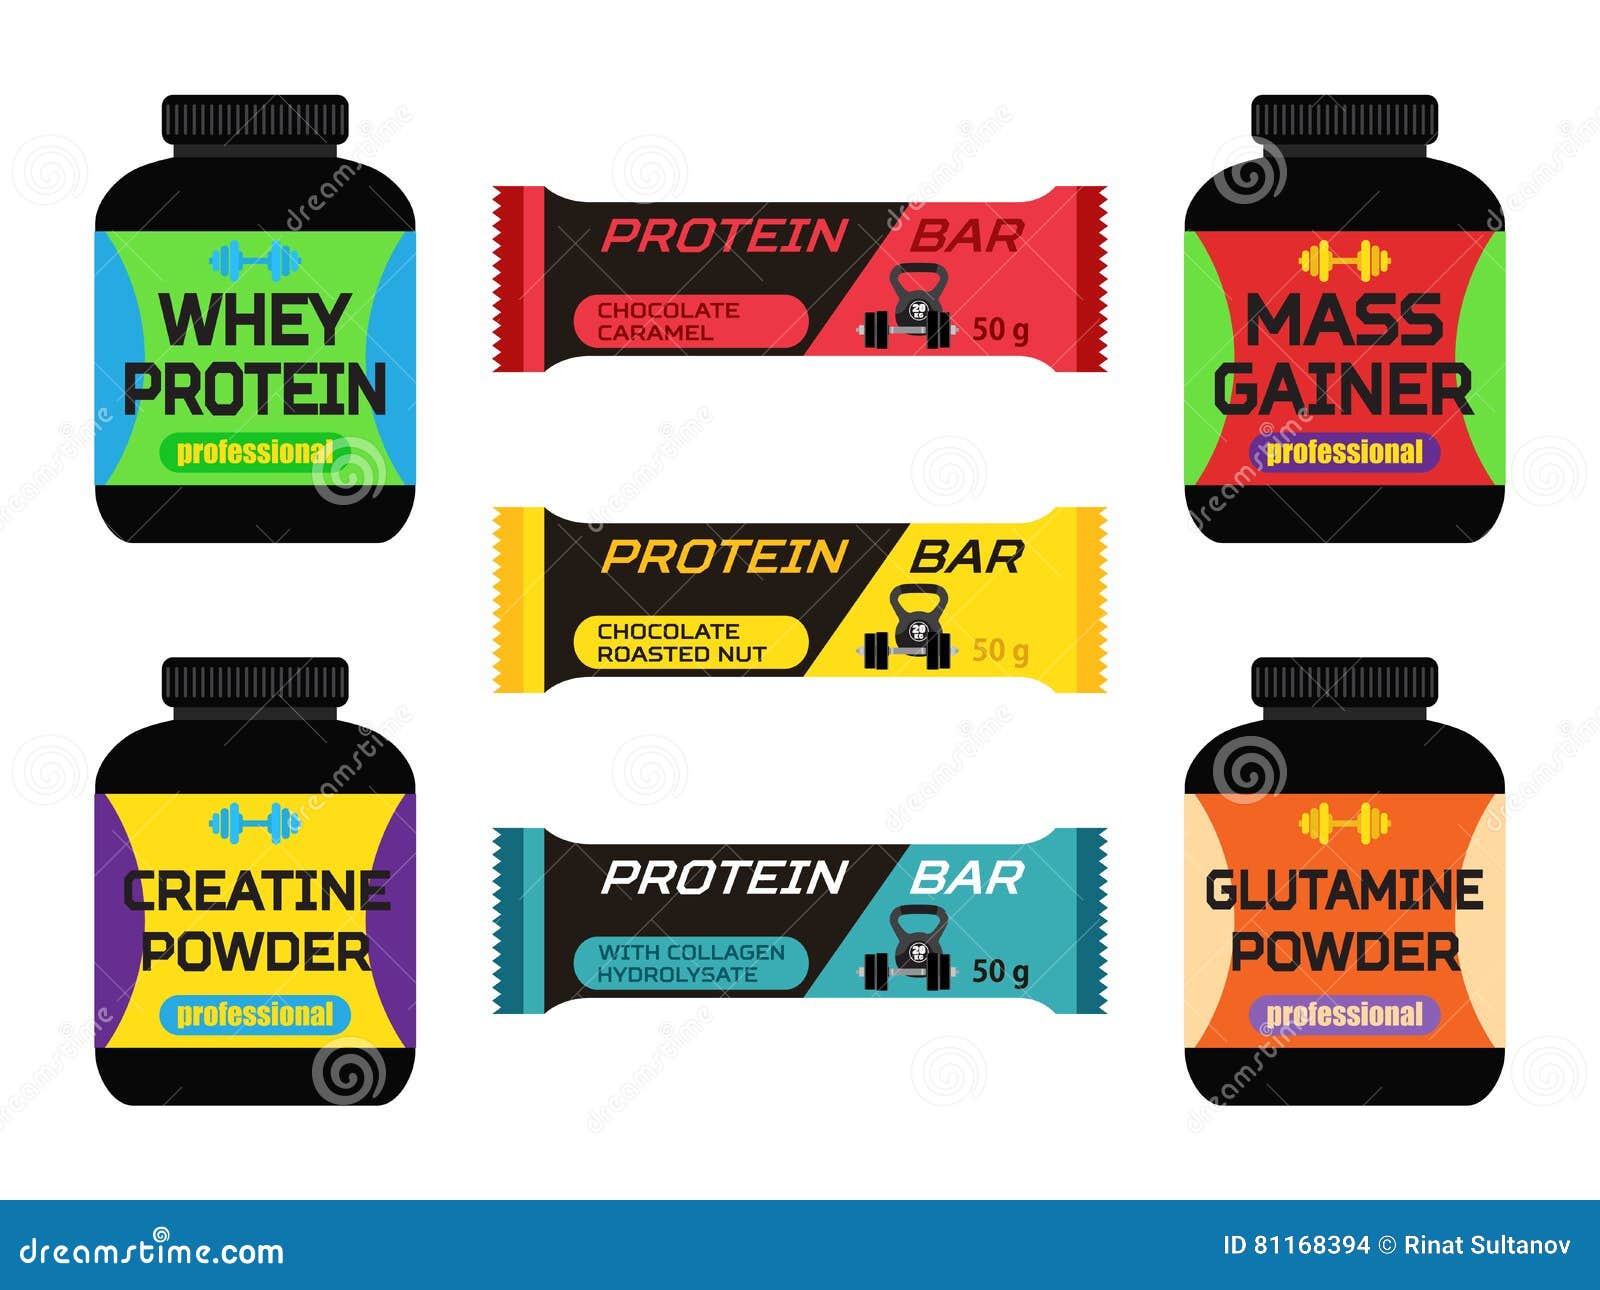 https://thumbs.dreamstime.com/z/sports-nutrition-supplements-creatine-whey-protein-gainer-bars-flat-style-made-vector-81168394.jpg